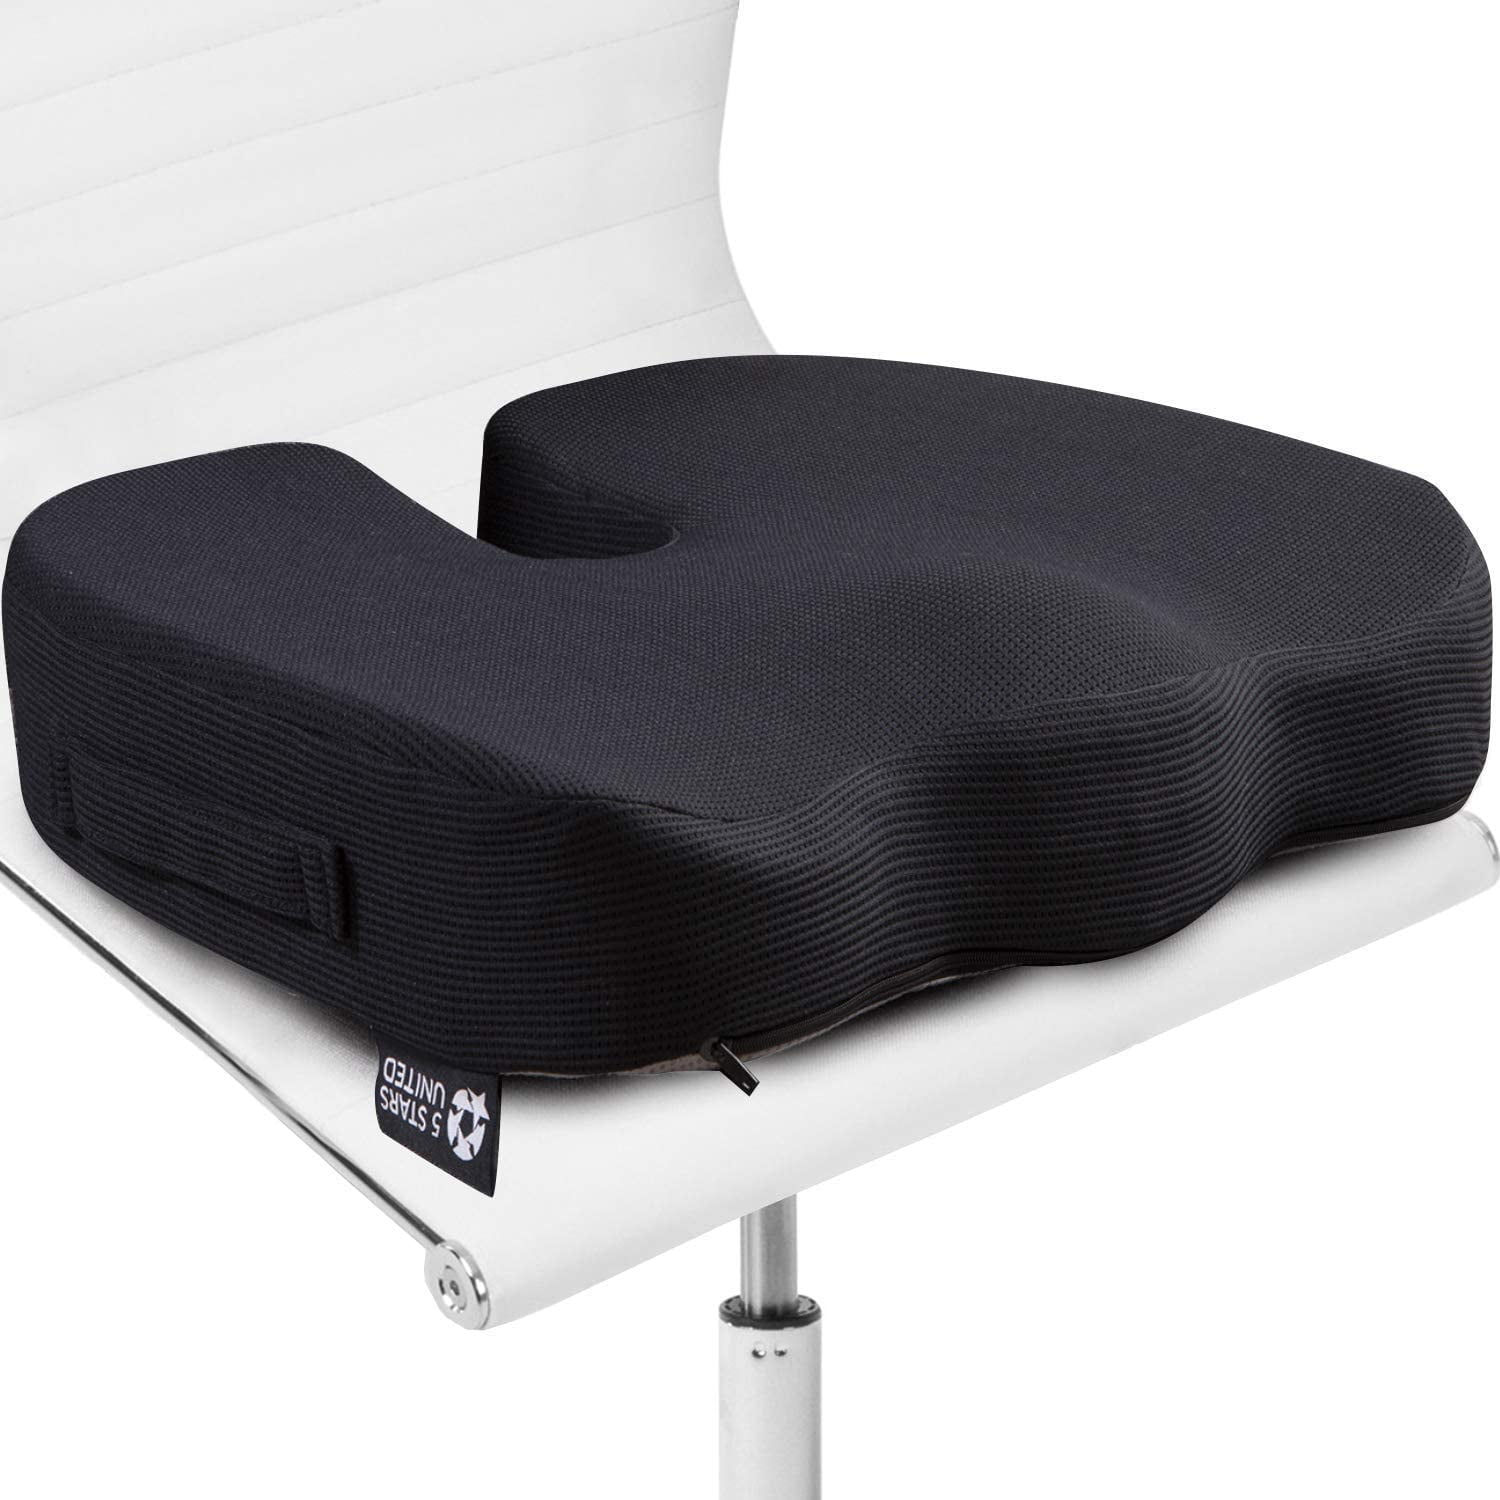 Memory Foam Seat Cushion/Foam Seat Cushion for Relieving Back,Orthopedic Coccyx Sciatica Tailbone Back Pain Relief/Memory Foam Seat Pads for Office Chairs Wheelchair Kitchen Chairs Recliner Car Seats